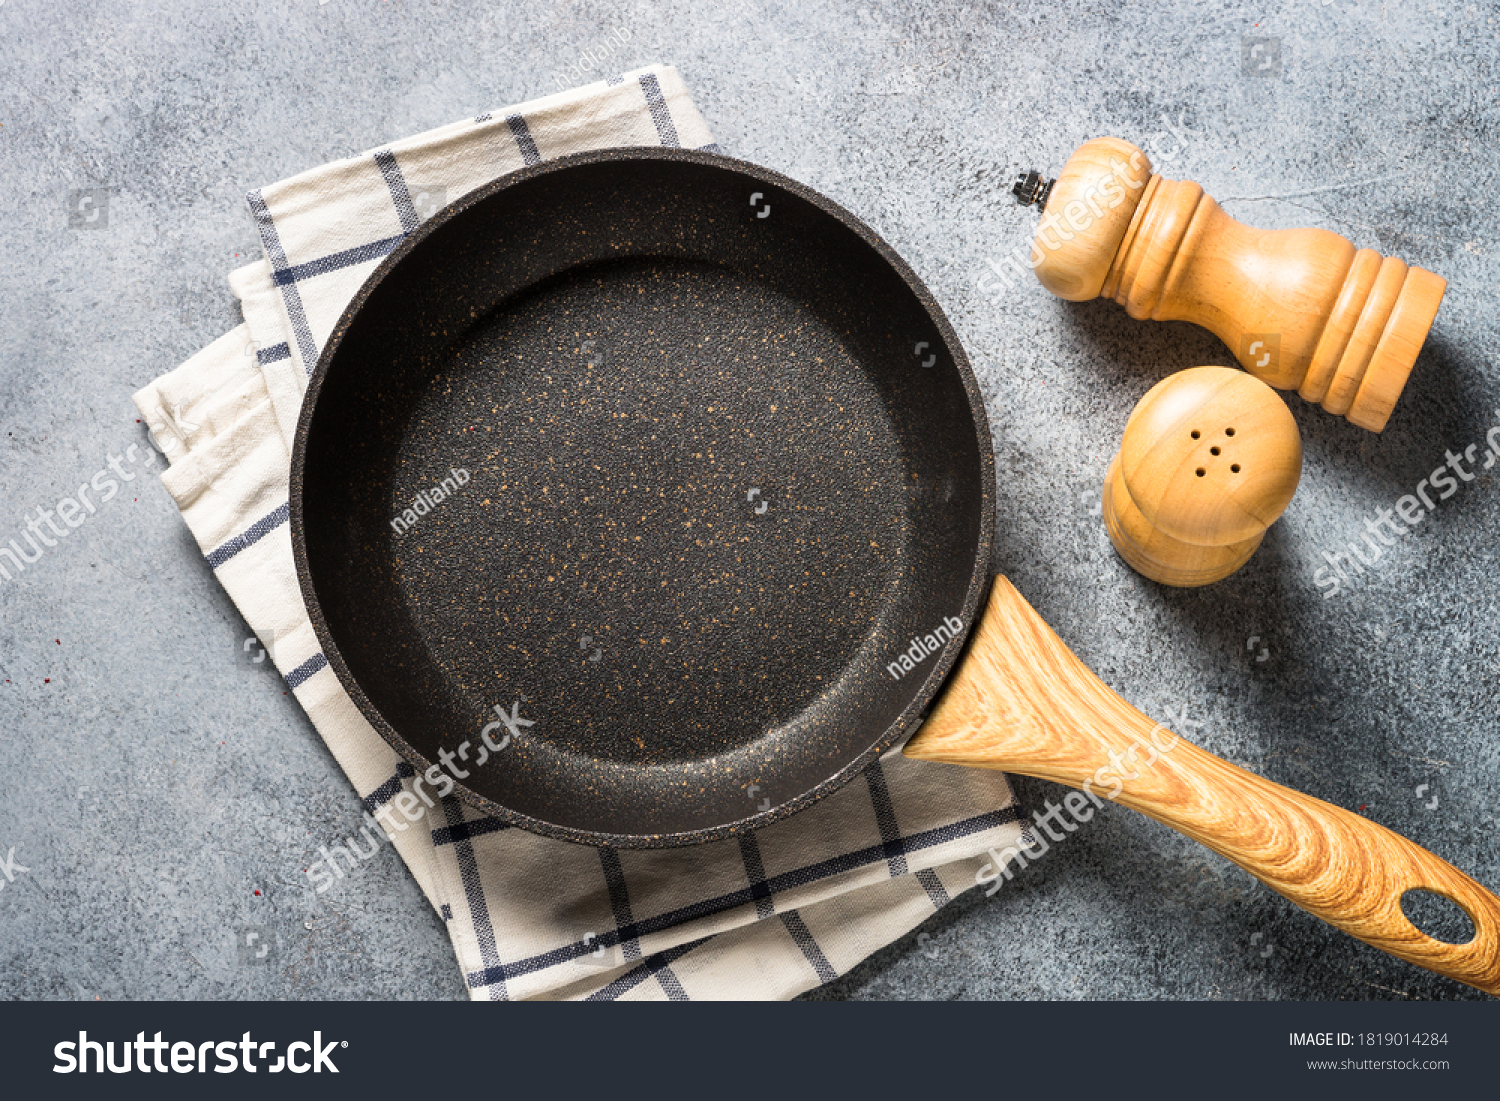 Frying pan or skillet with stone nonstick coating on light stone table. Top view with copy space. #1819014284